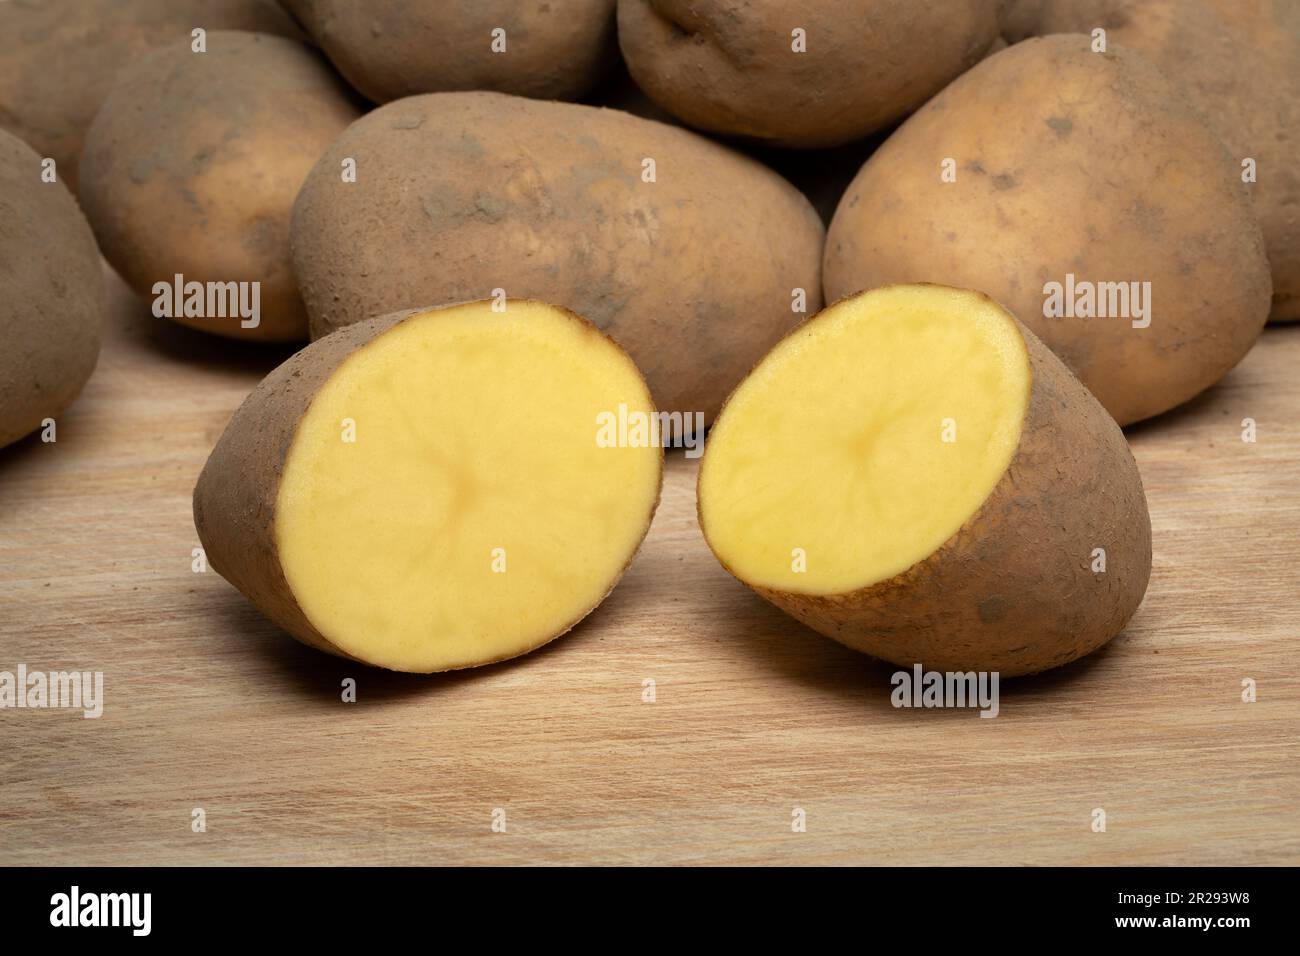 Dutch variety potato called Bintje whole and halved on wooden background close up Stock Photo